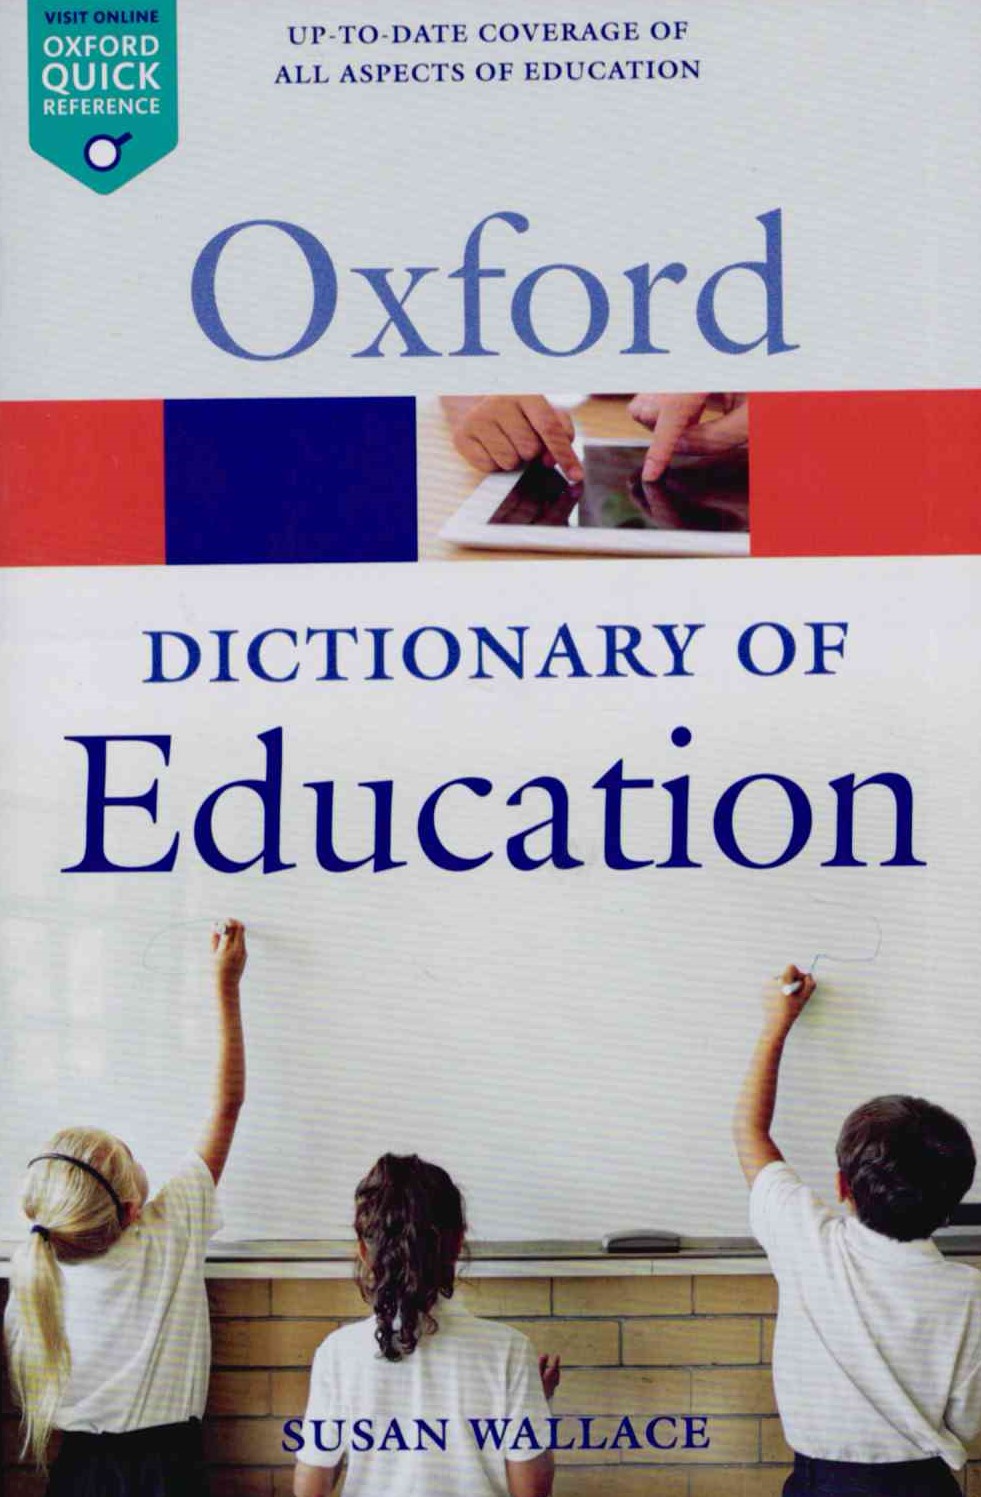 Oxford Dictionary of Education (2nd Edition)